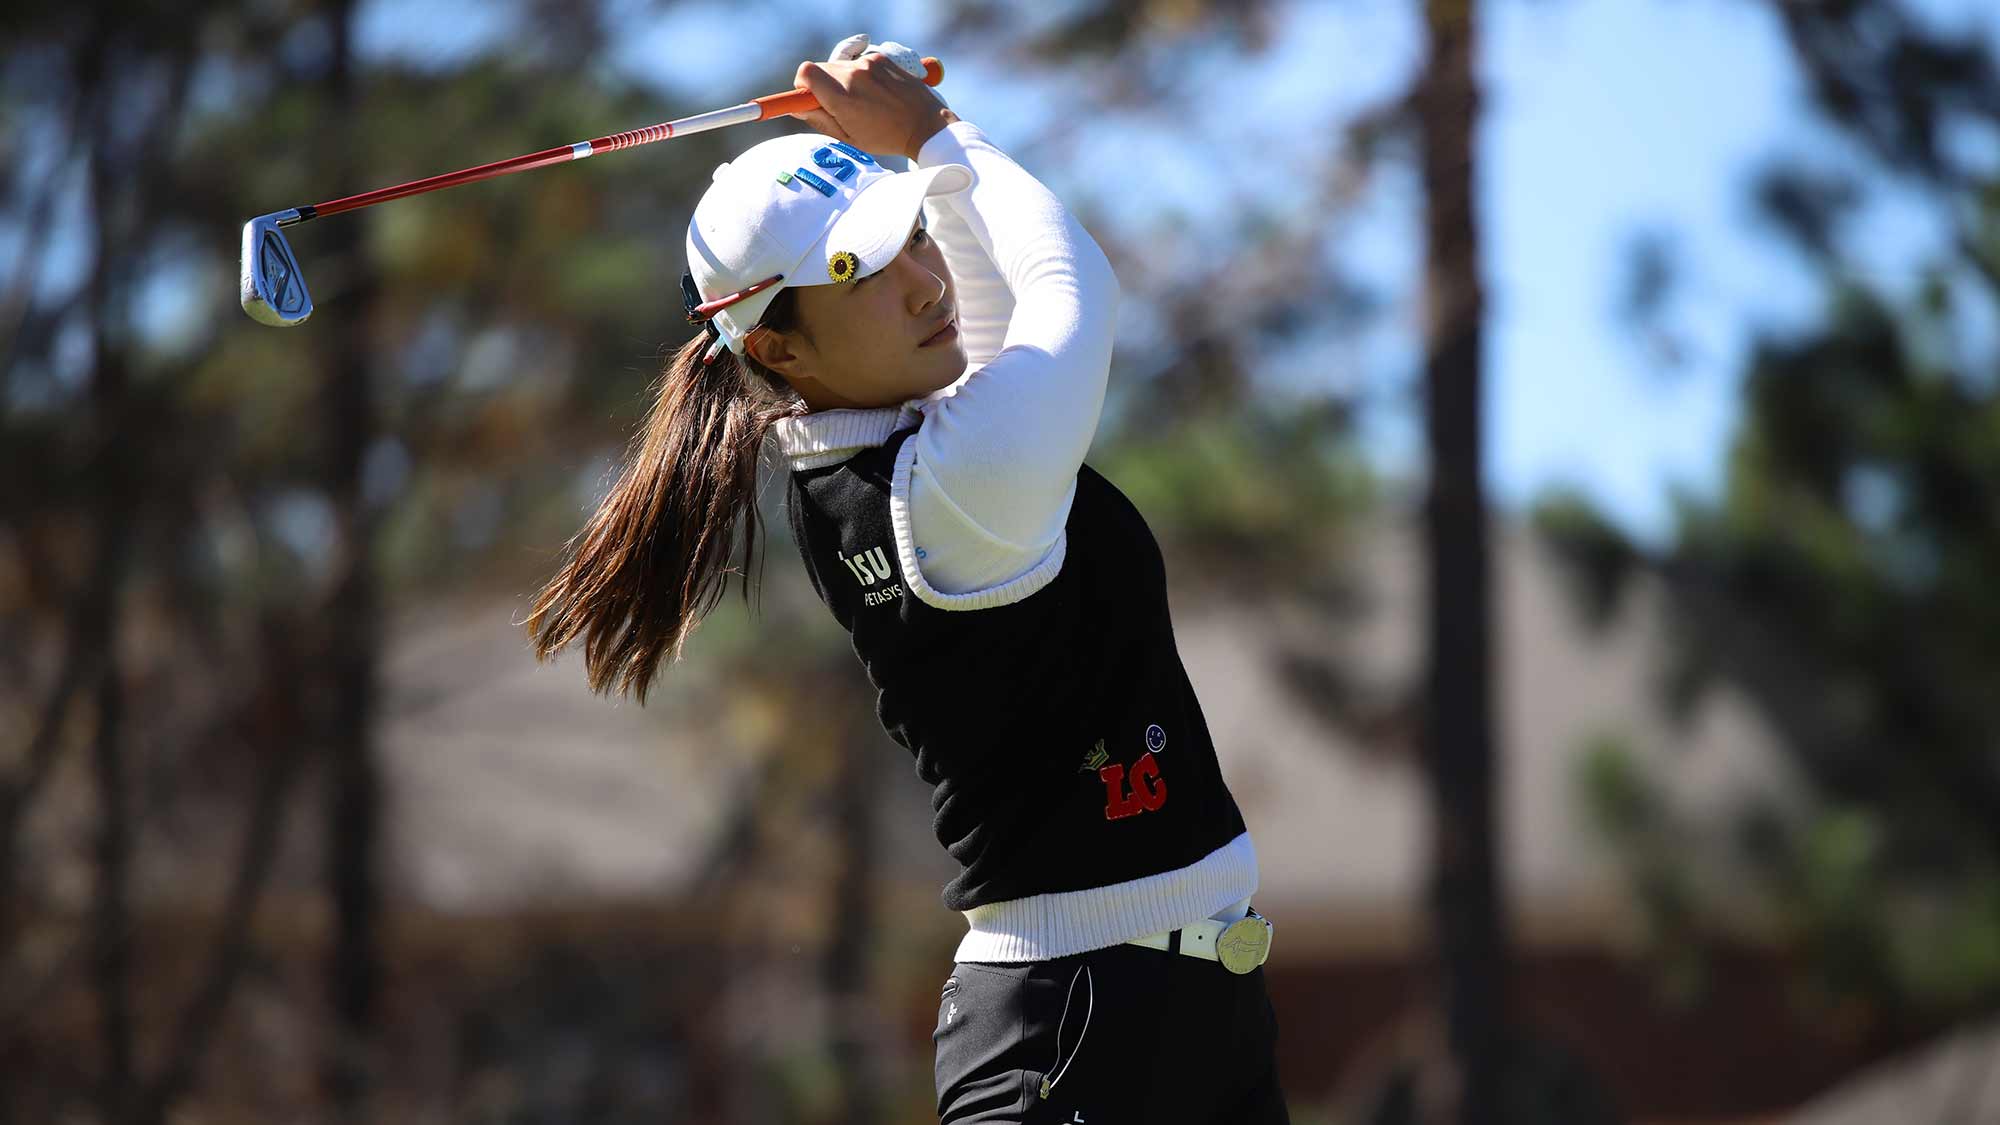 Hee Young Park hits her drive during the second round of the 2019 LPGA Q-Series at Pinehurst Resort